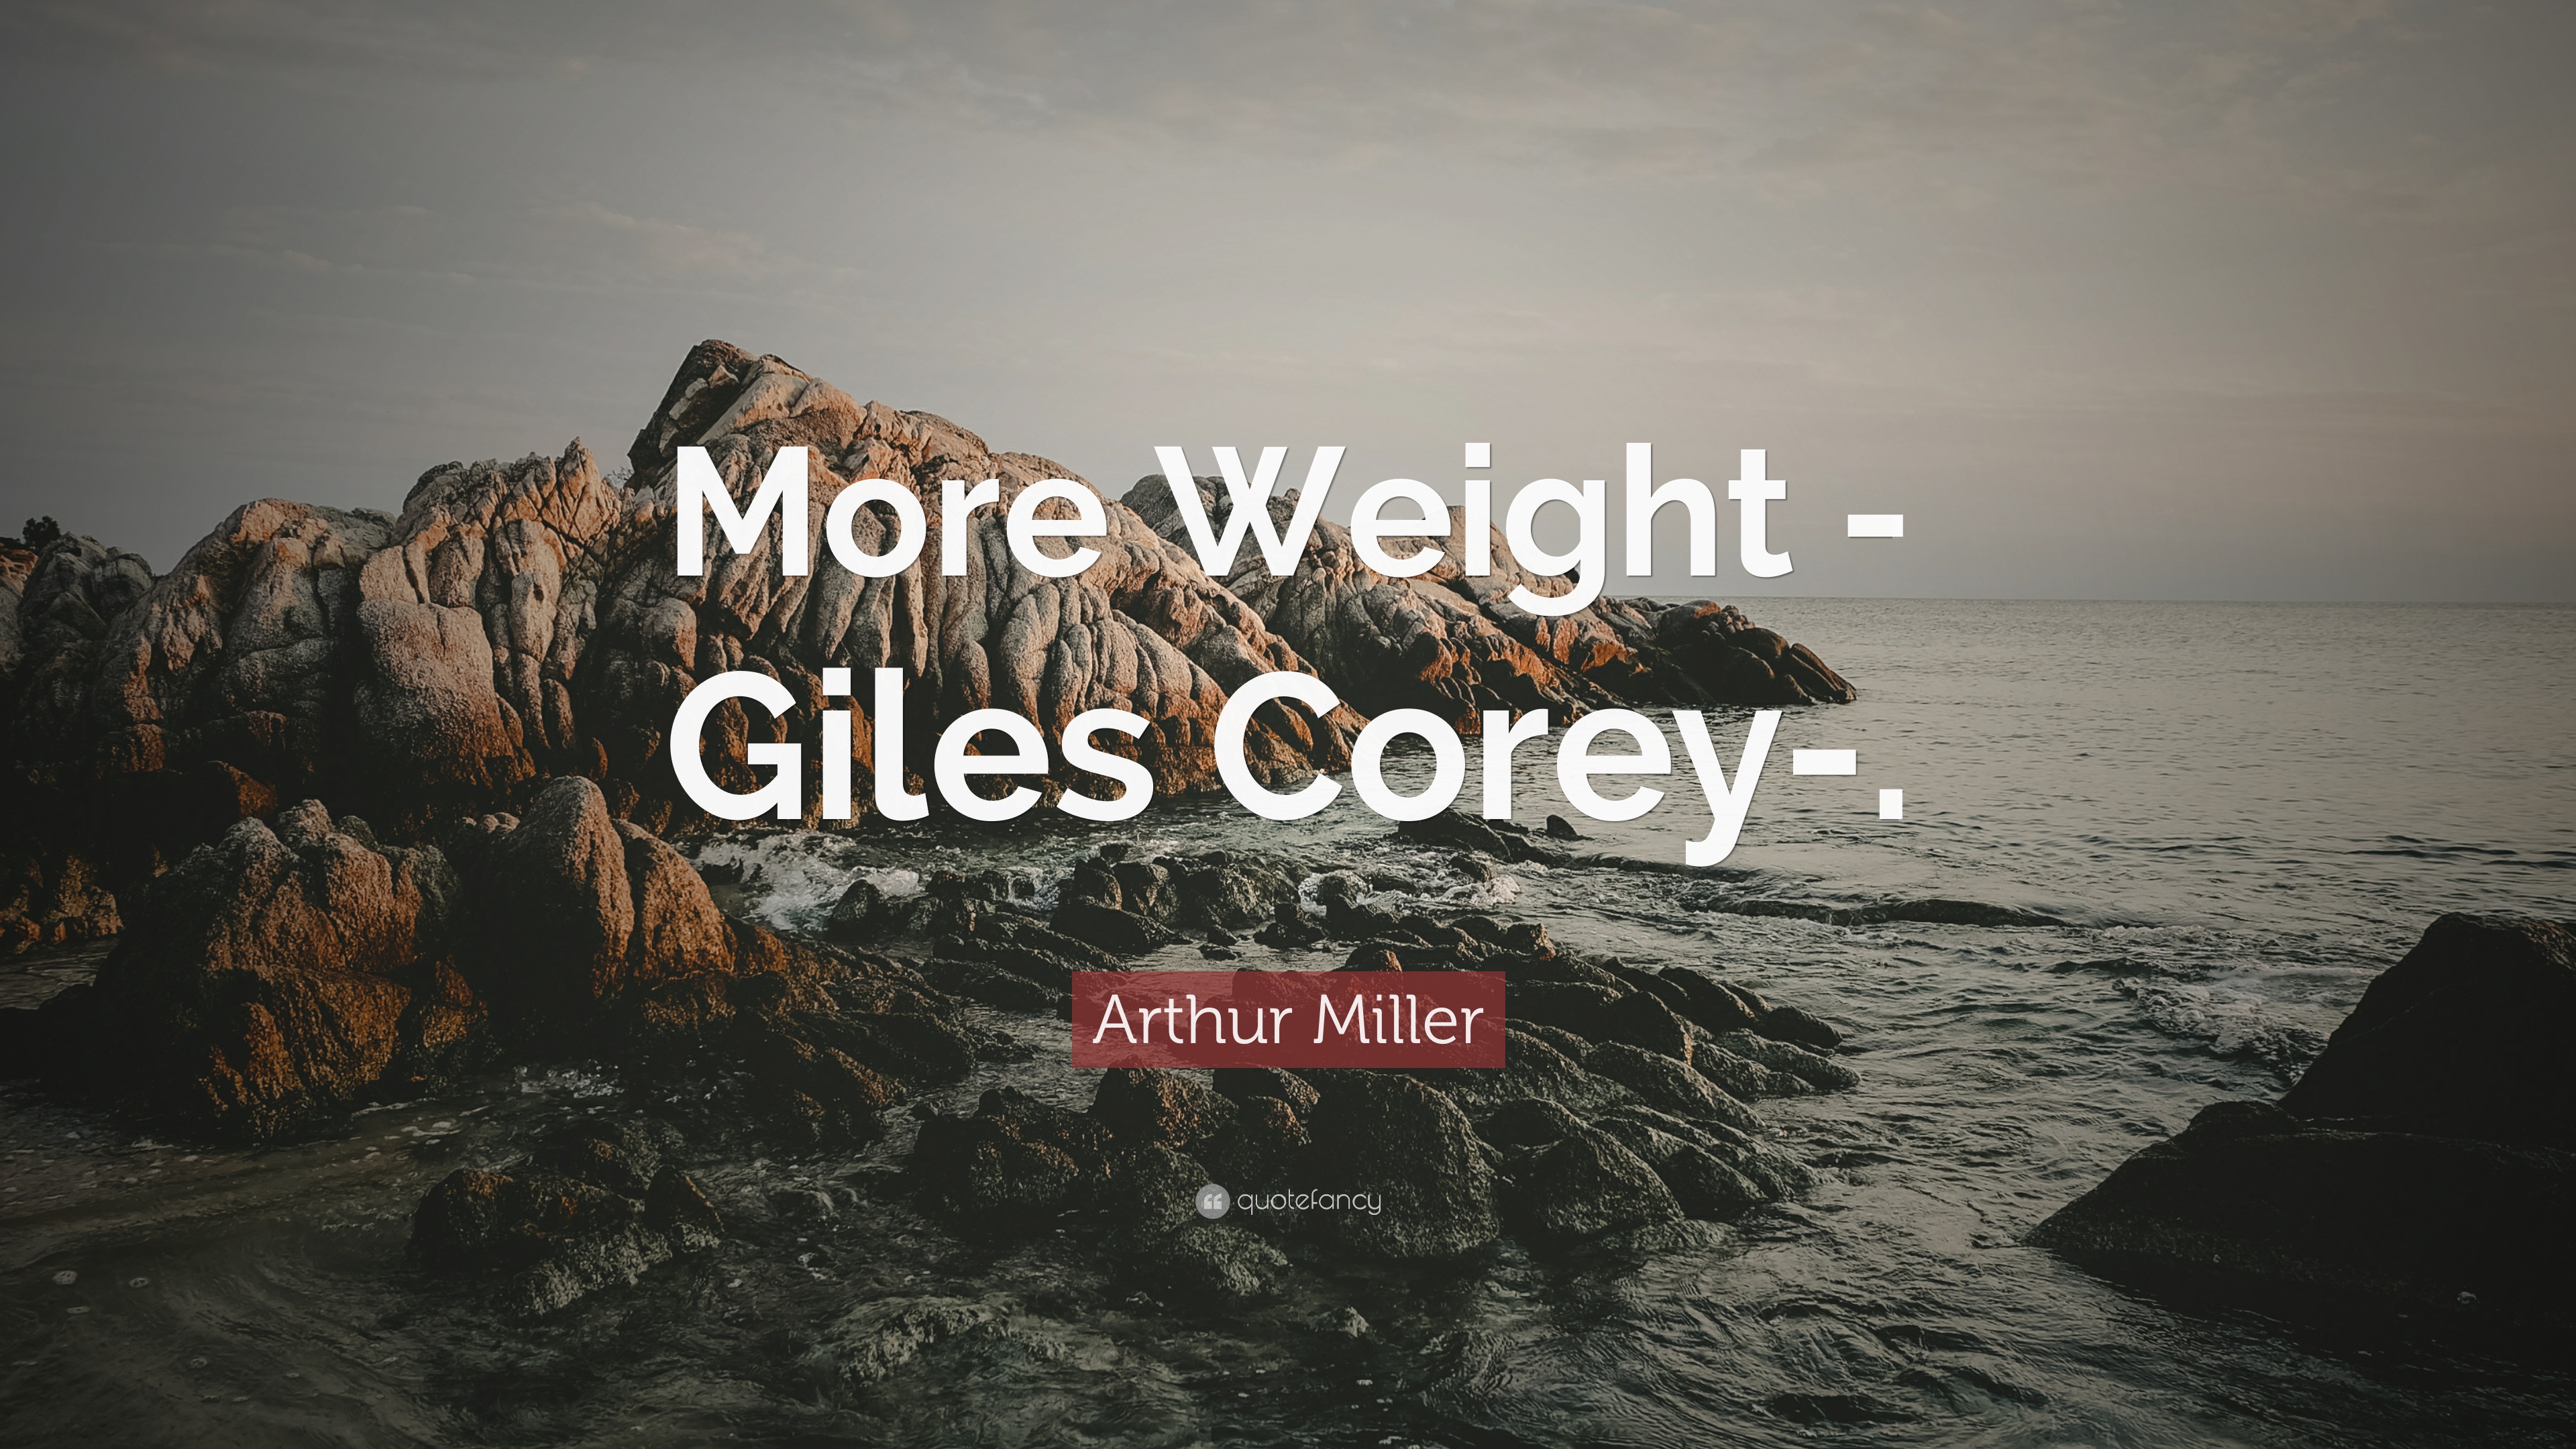 Arthur Miller Quote: “More Weight -Giles Corey-.”